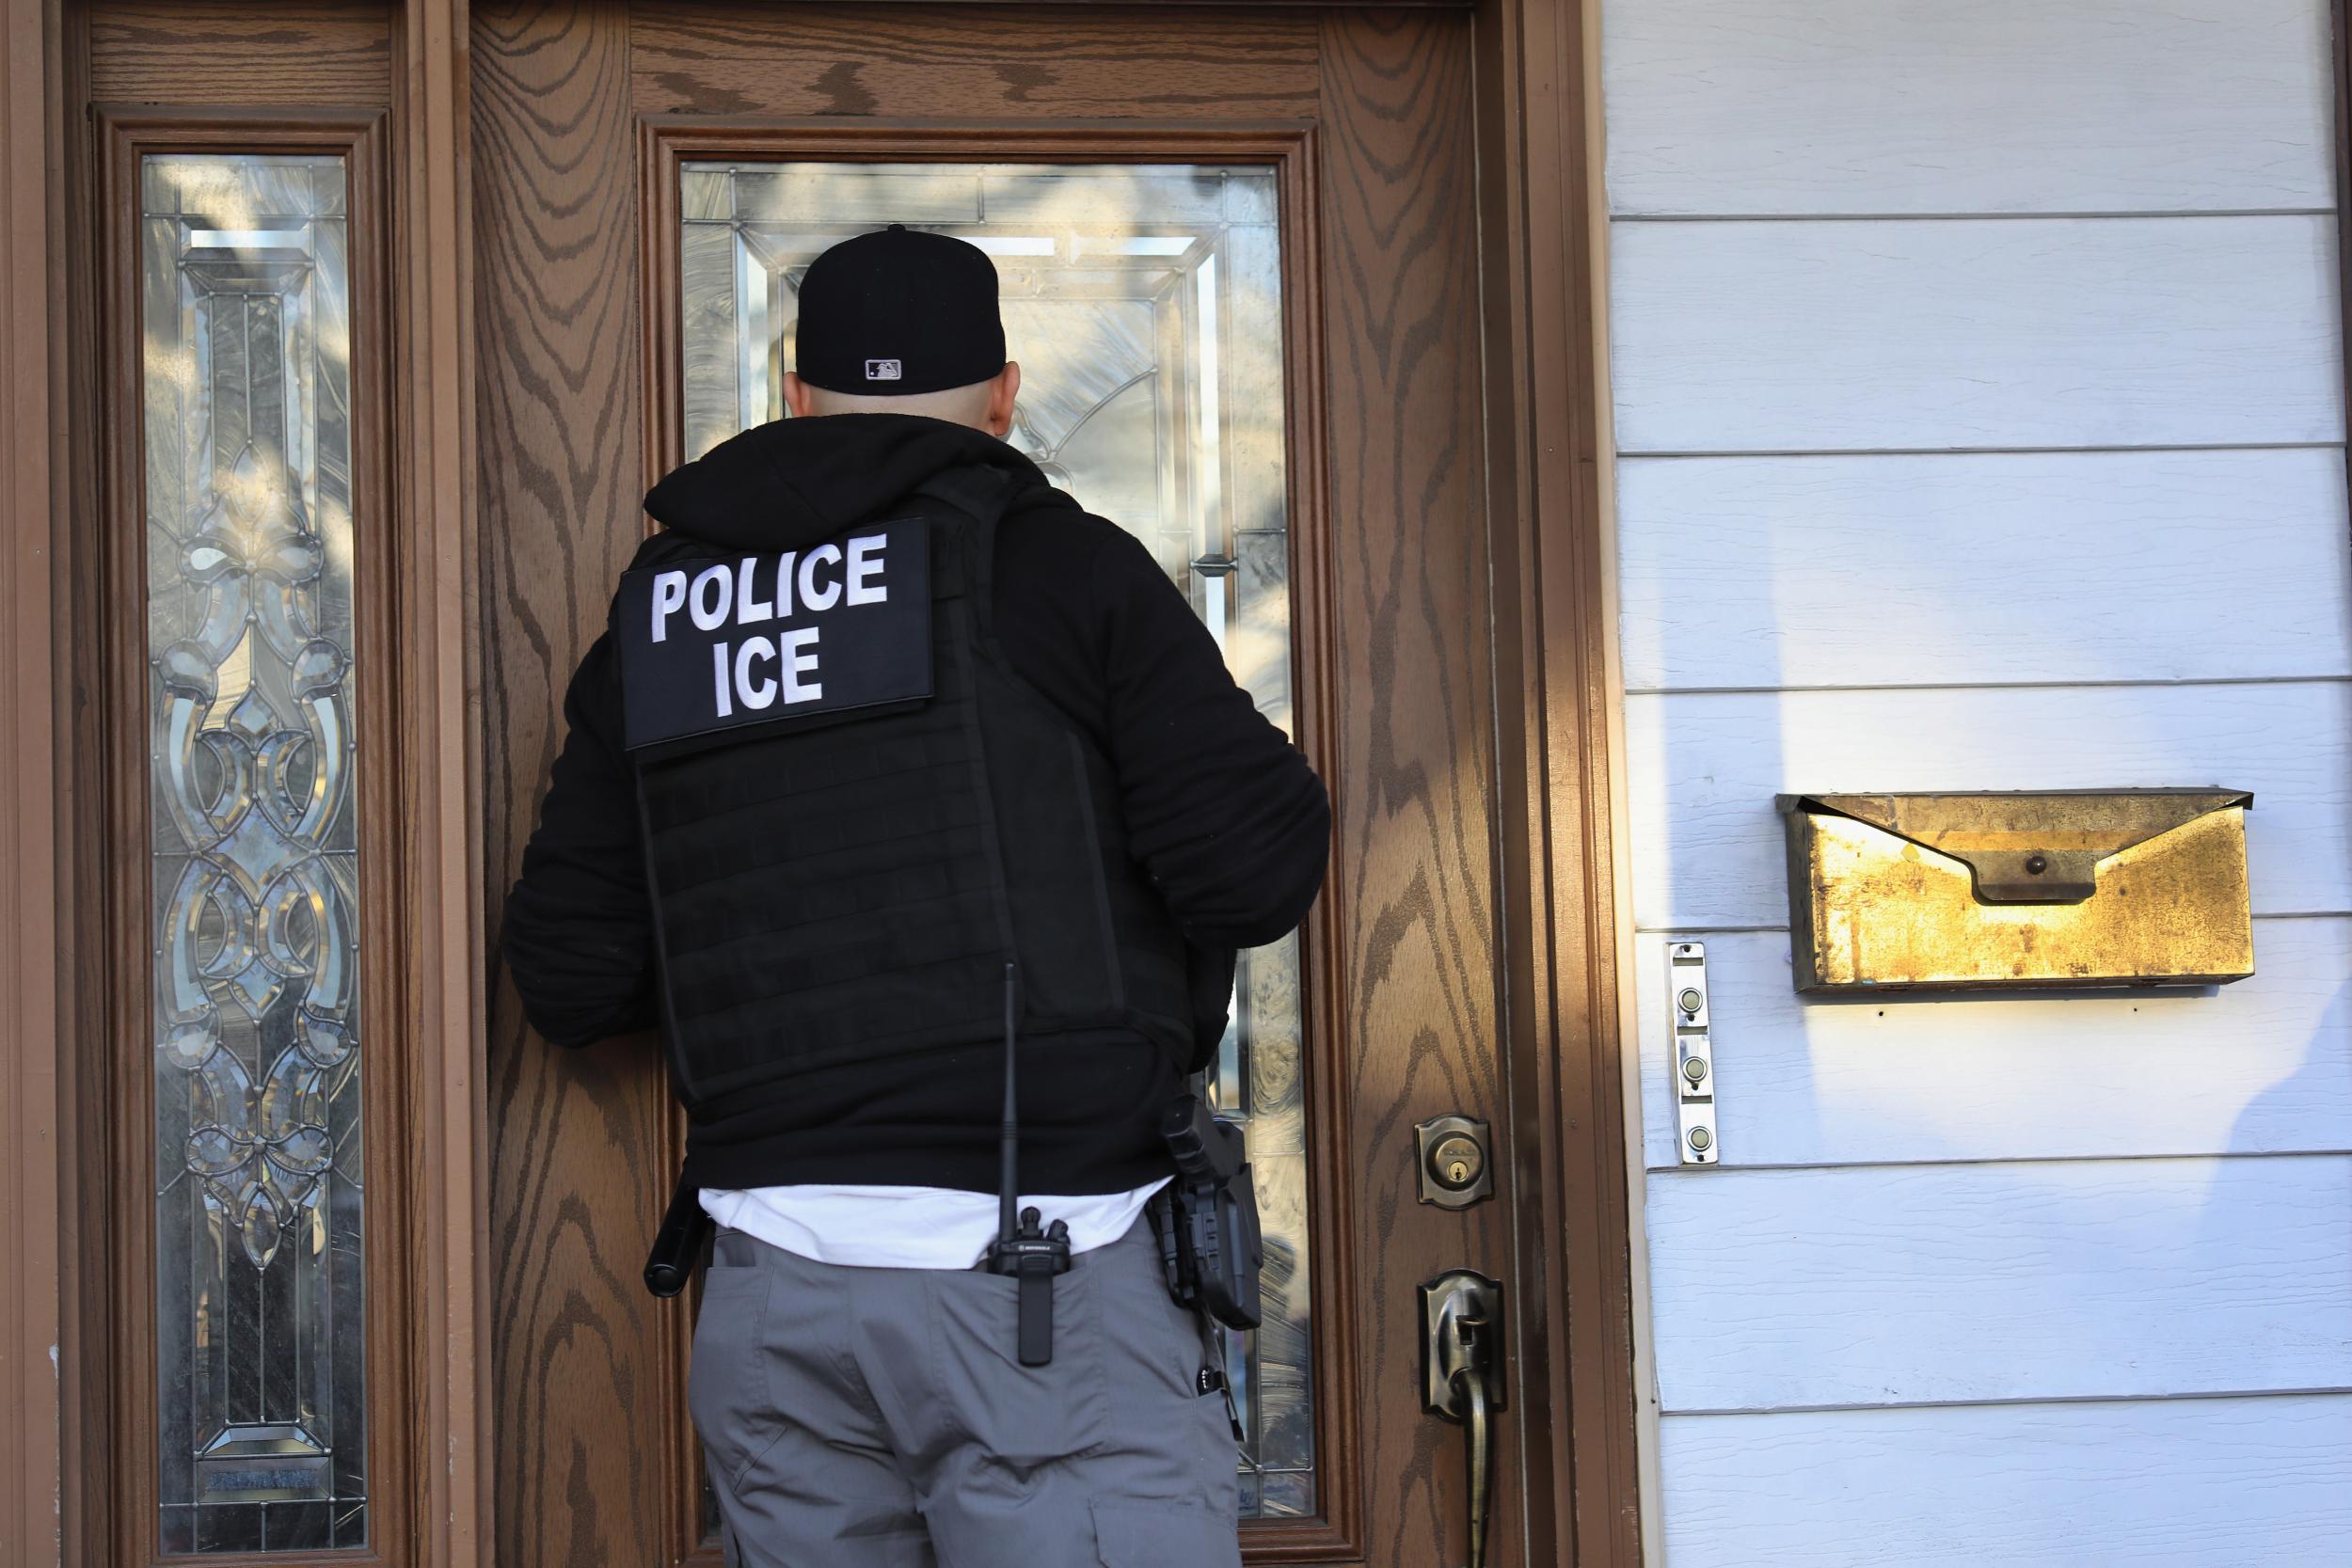 U.S. Immigration and Customs Enforcement (ICE), officers arrive to a Flatbush Gardens home in search of an undocumented immigrant